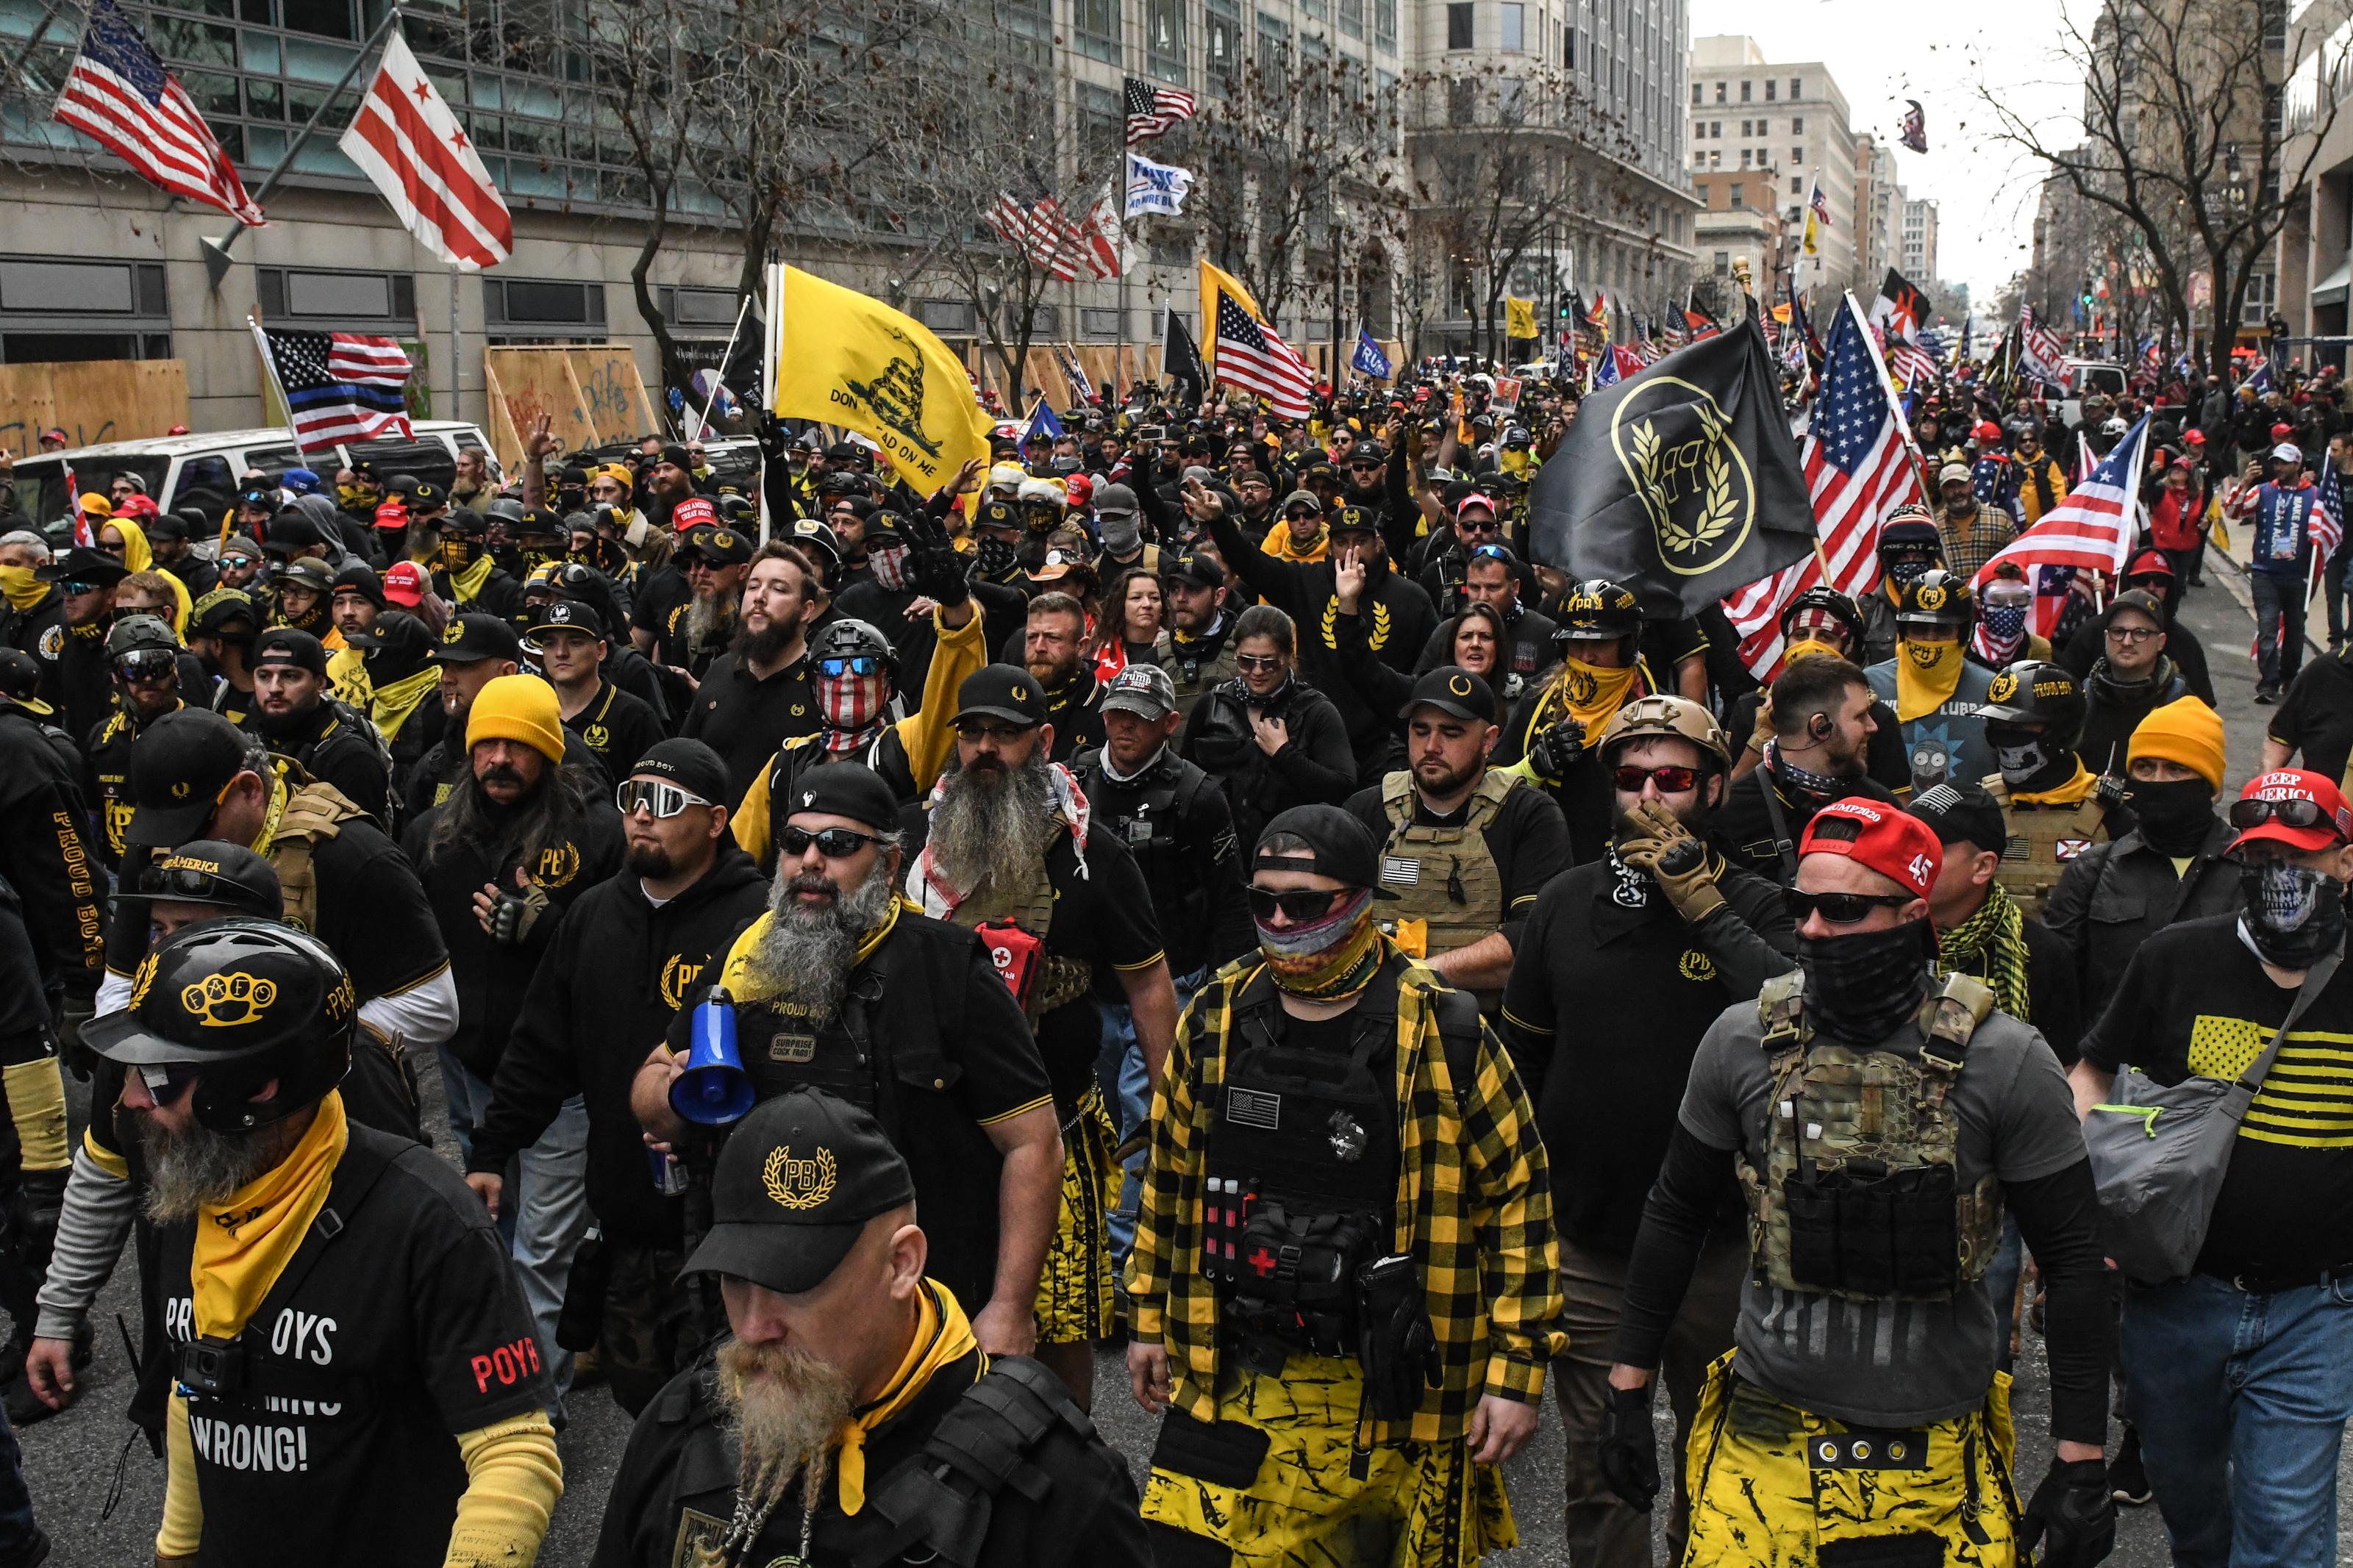 Members of the Proud Boys march towards Freedom Plaza during a protest on December 12, 2020 in Washington, D.C.